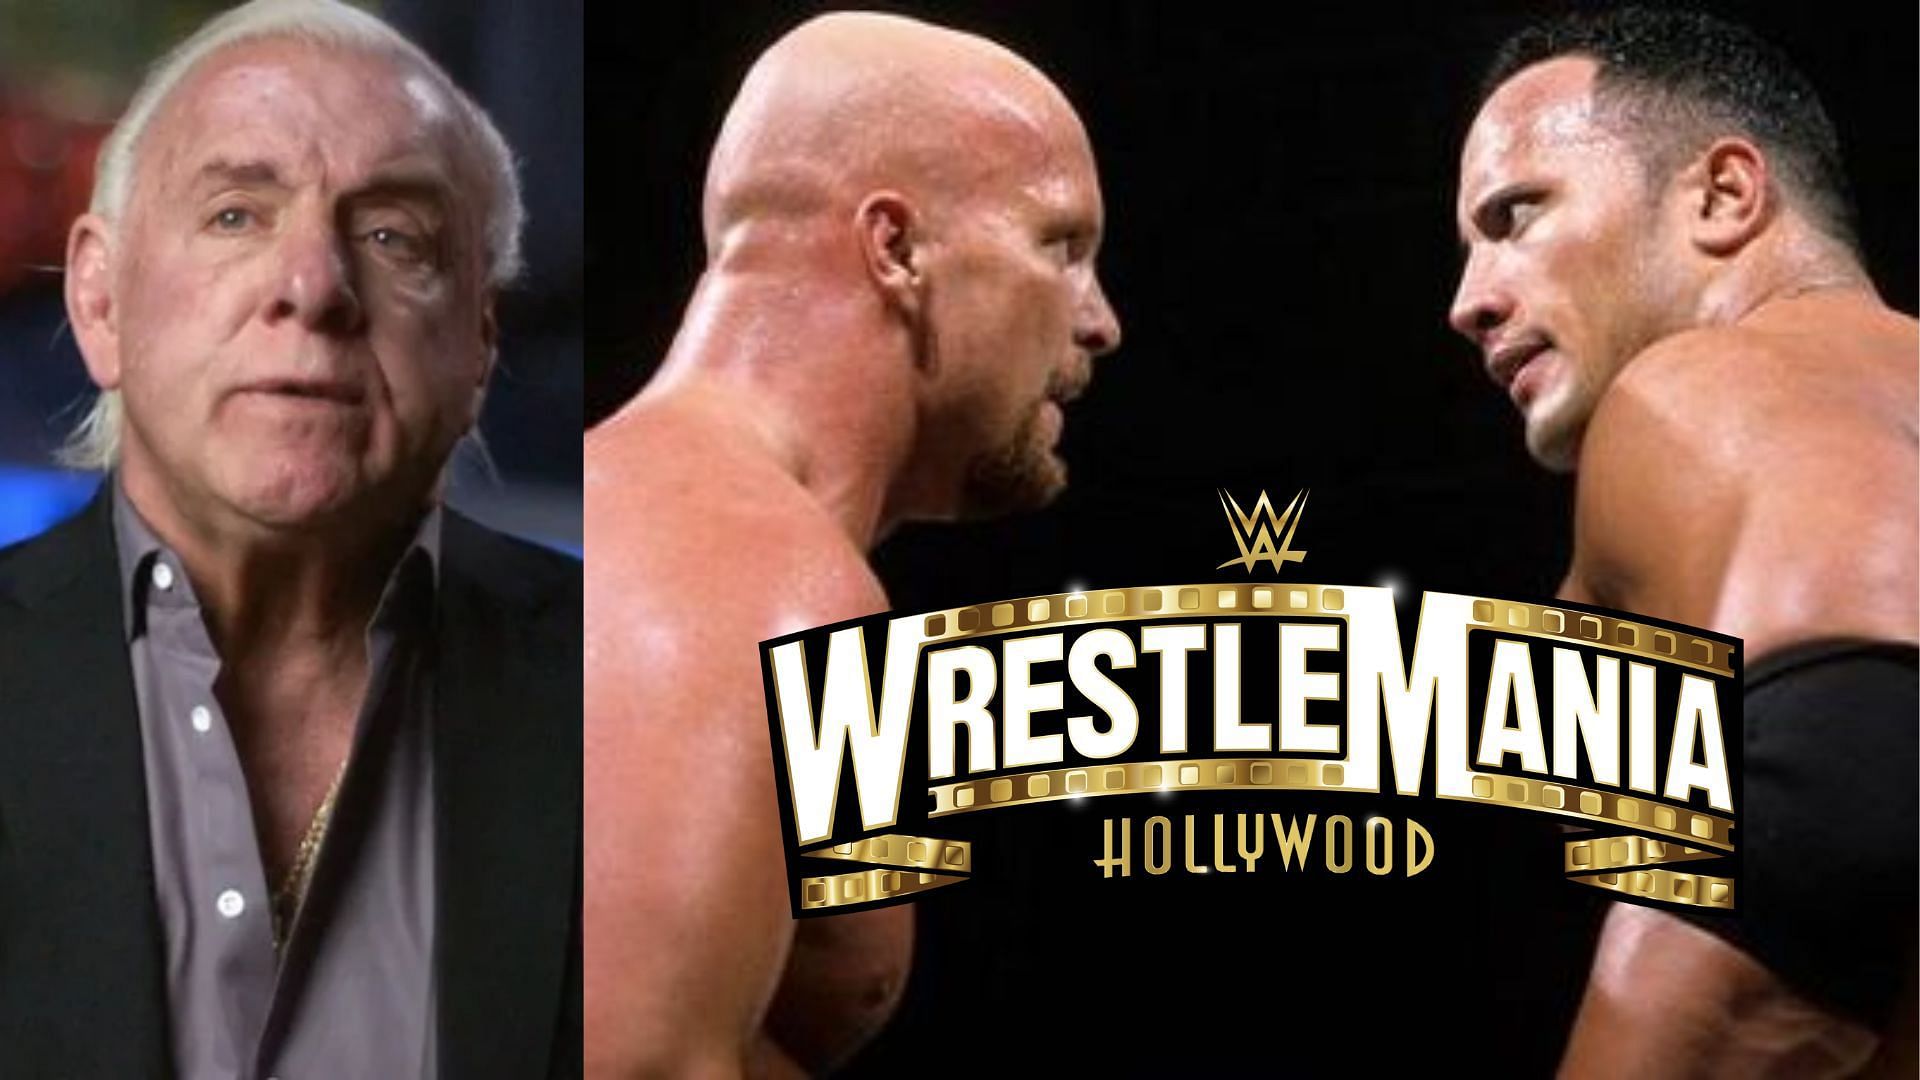 Ric Flair has made a big claim about a rumored WrestleMania match.